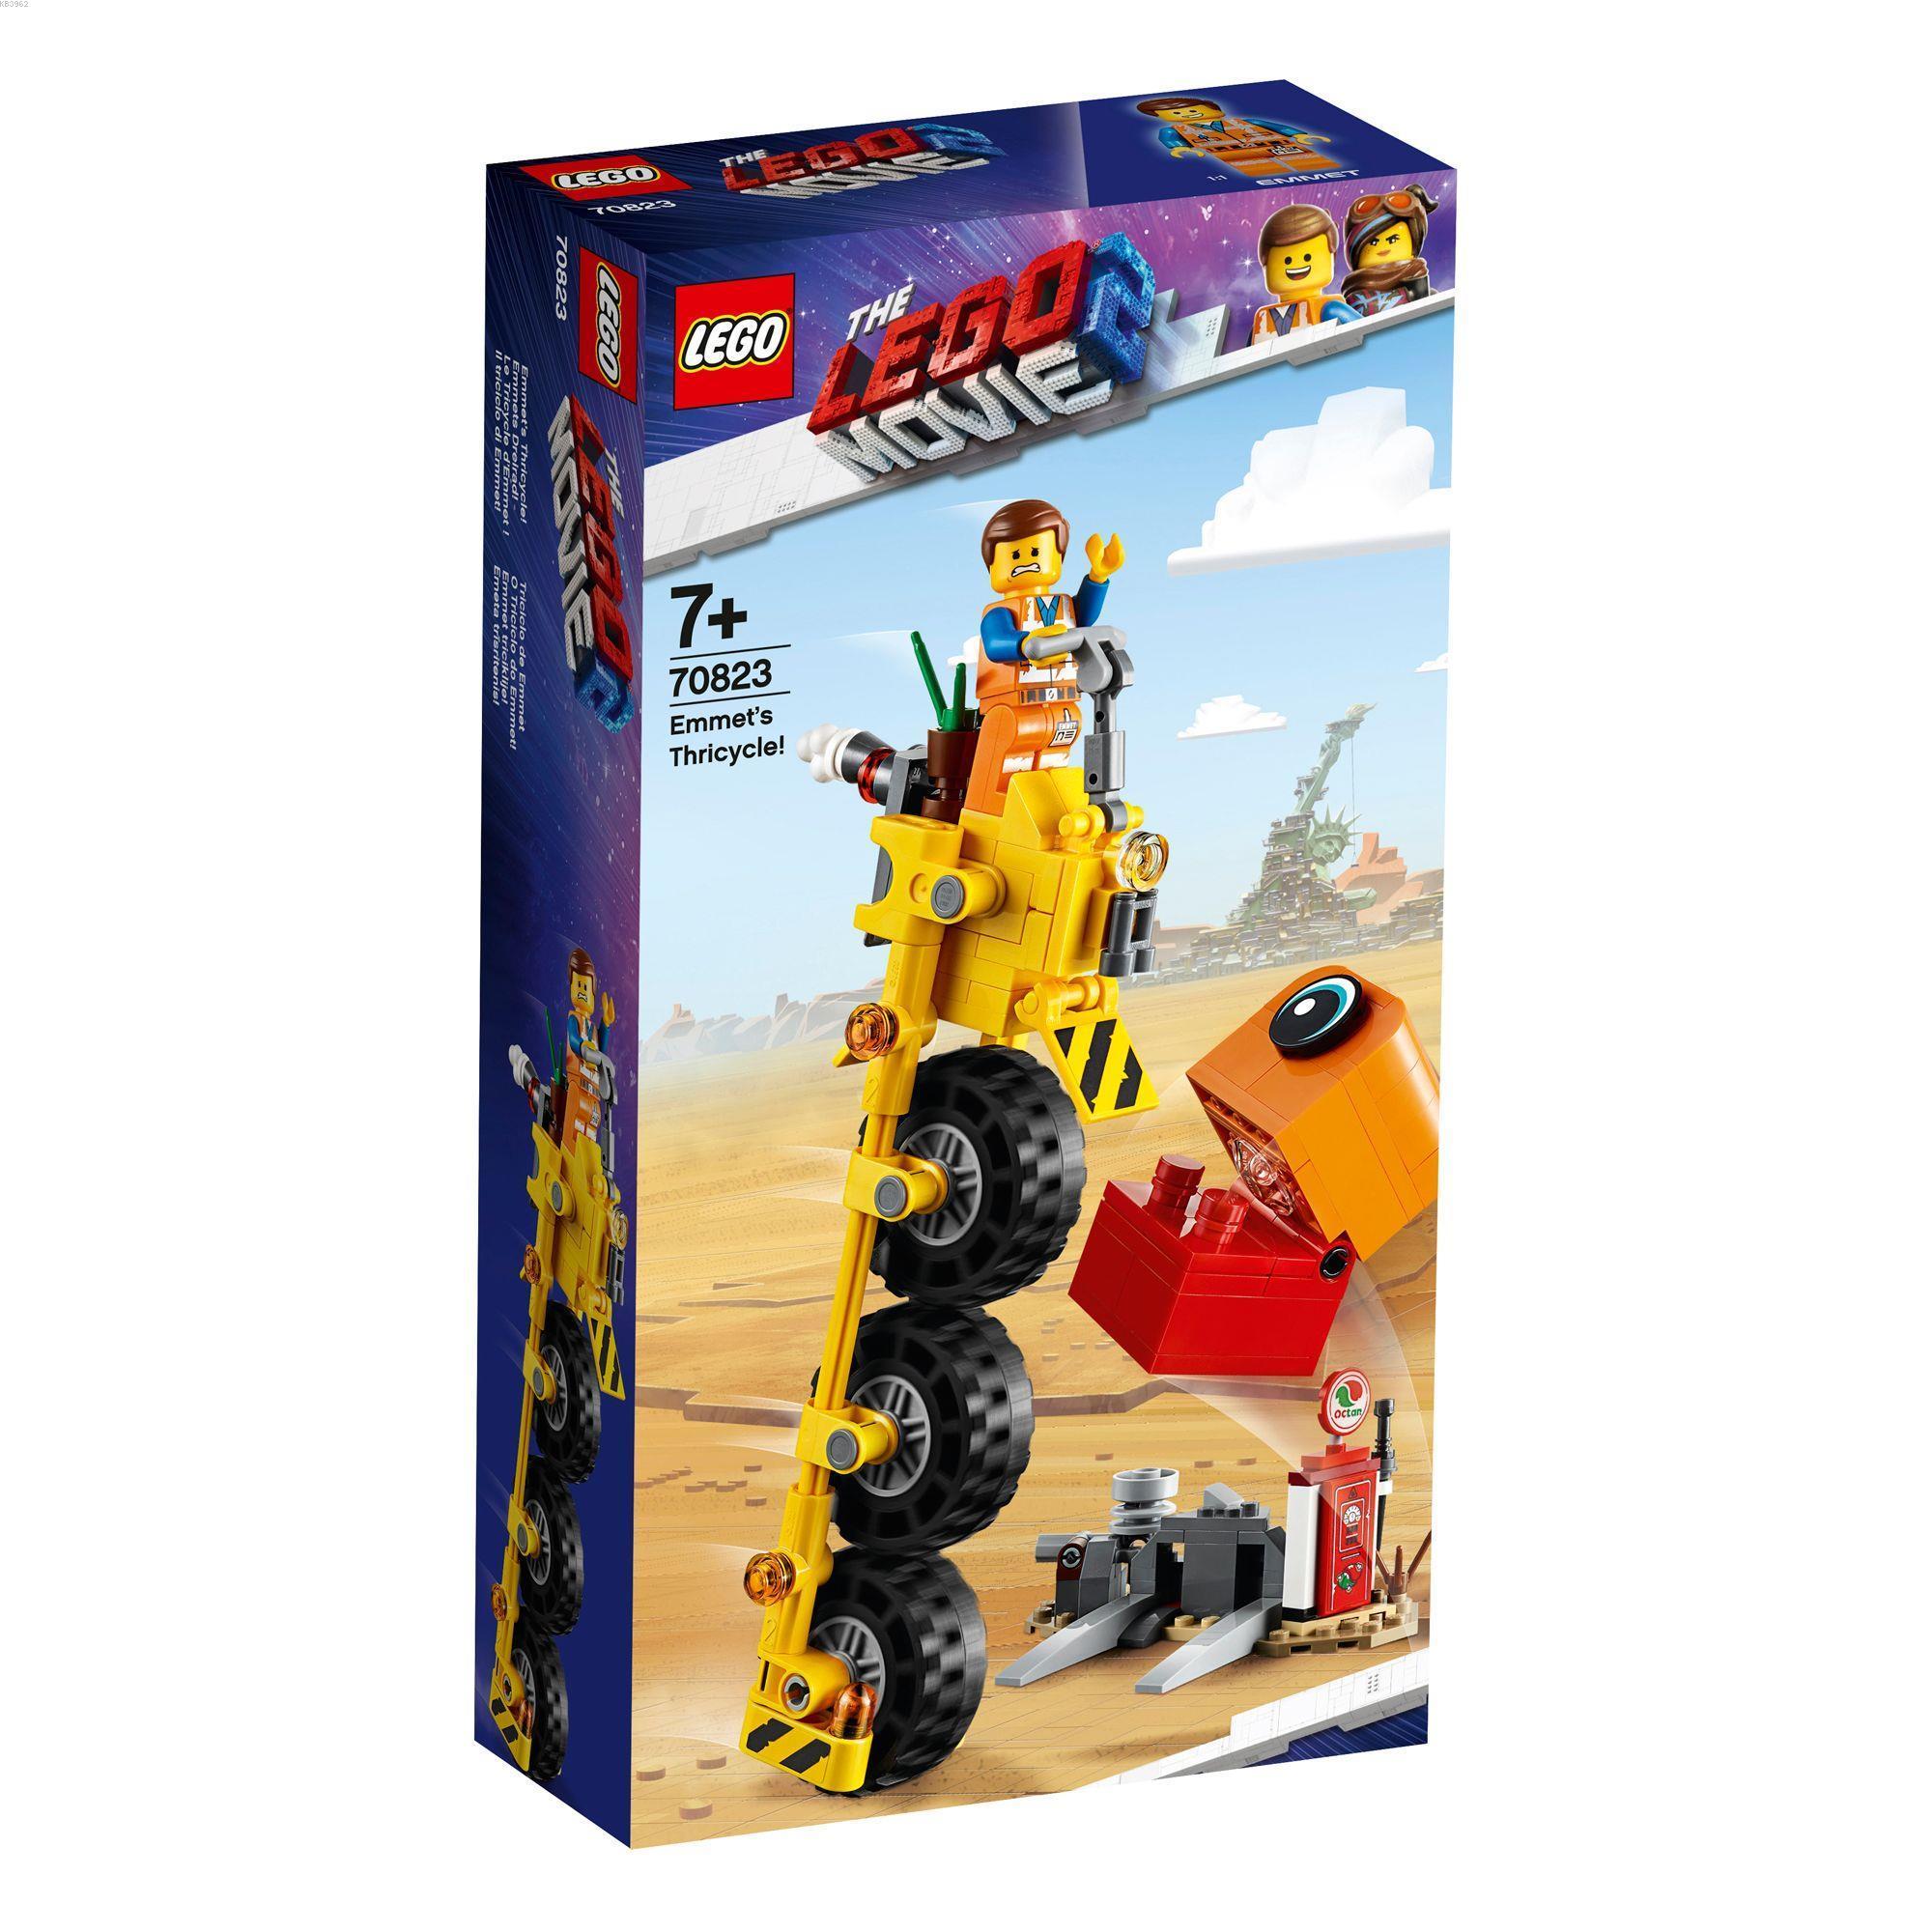 Lego Movie 2 70823 Emmets Thricycle